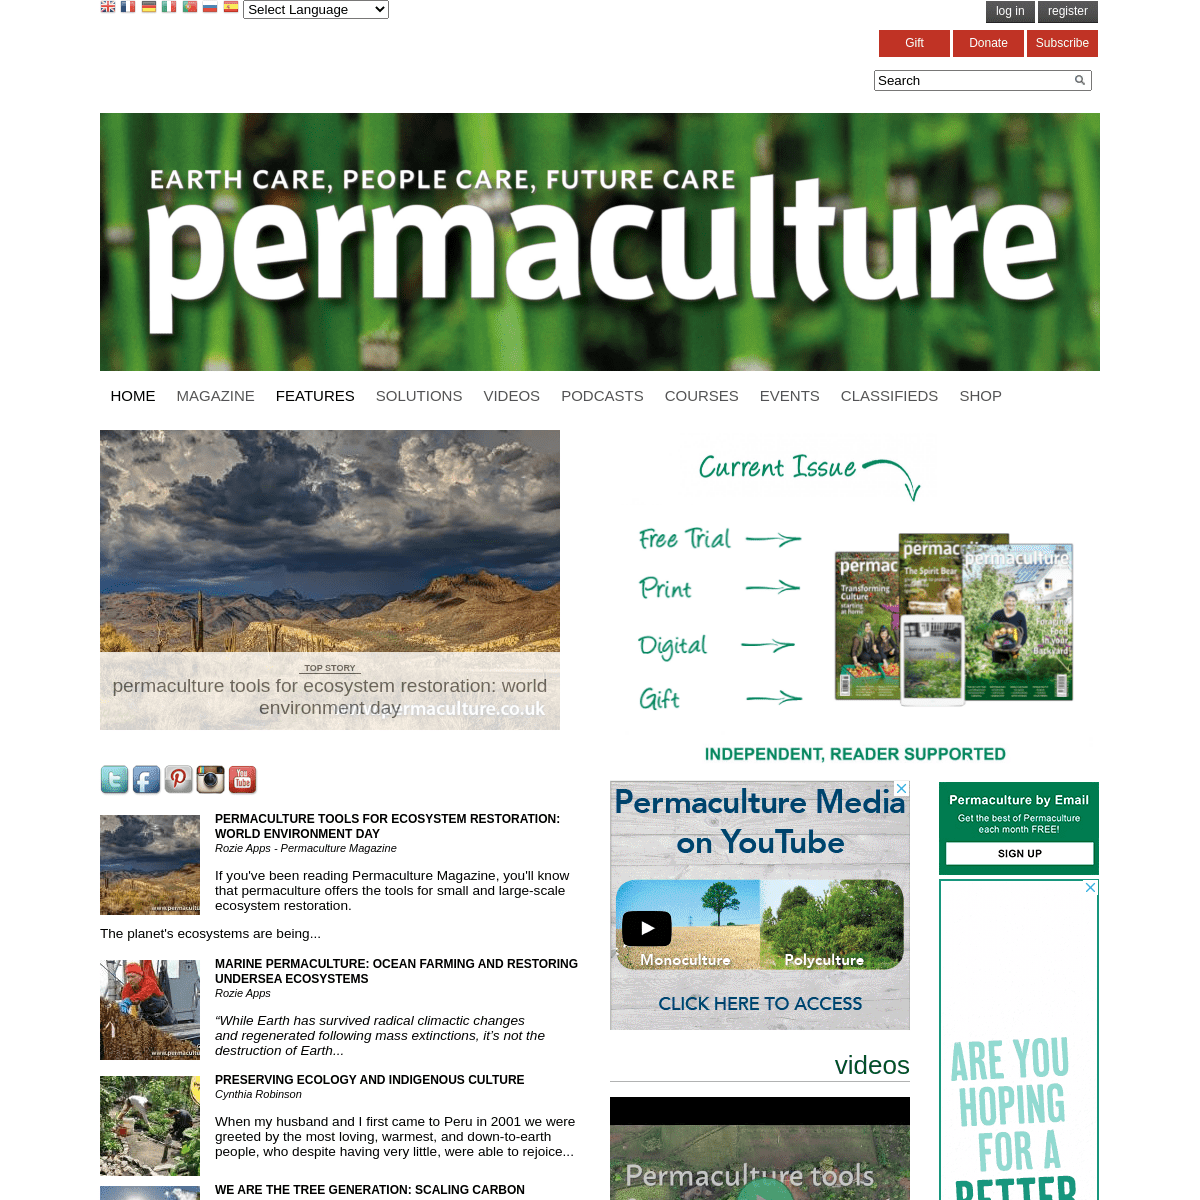 A complete backup of https://permaculture.co.uk